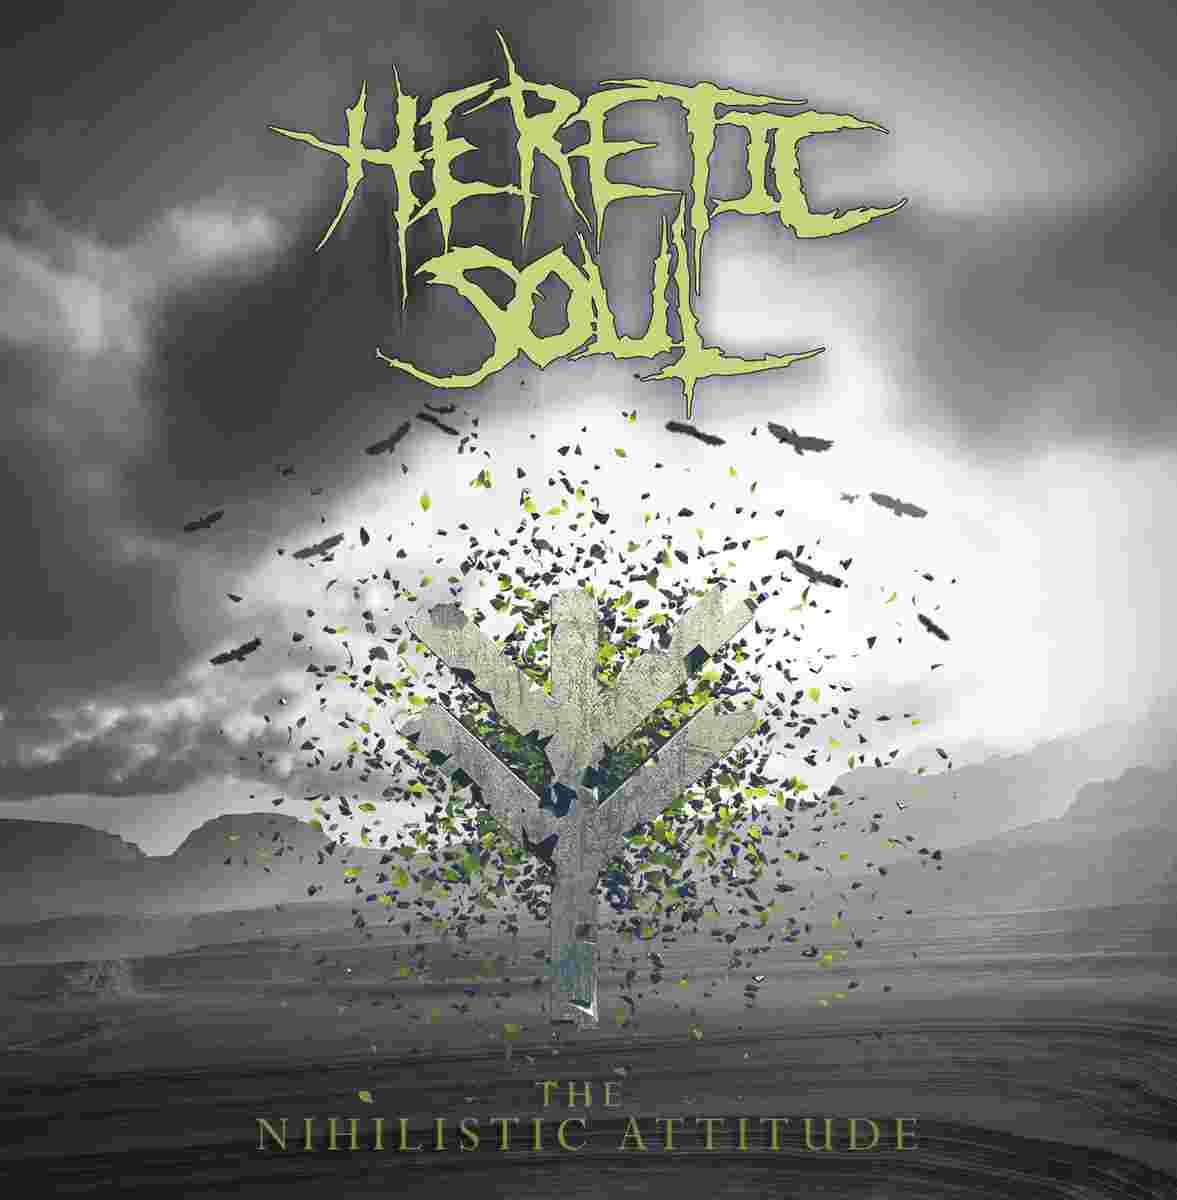 HERETIC SOUL - Corrupted Human Race cover 